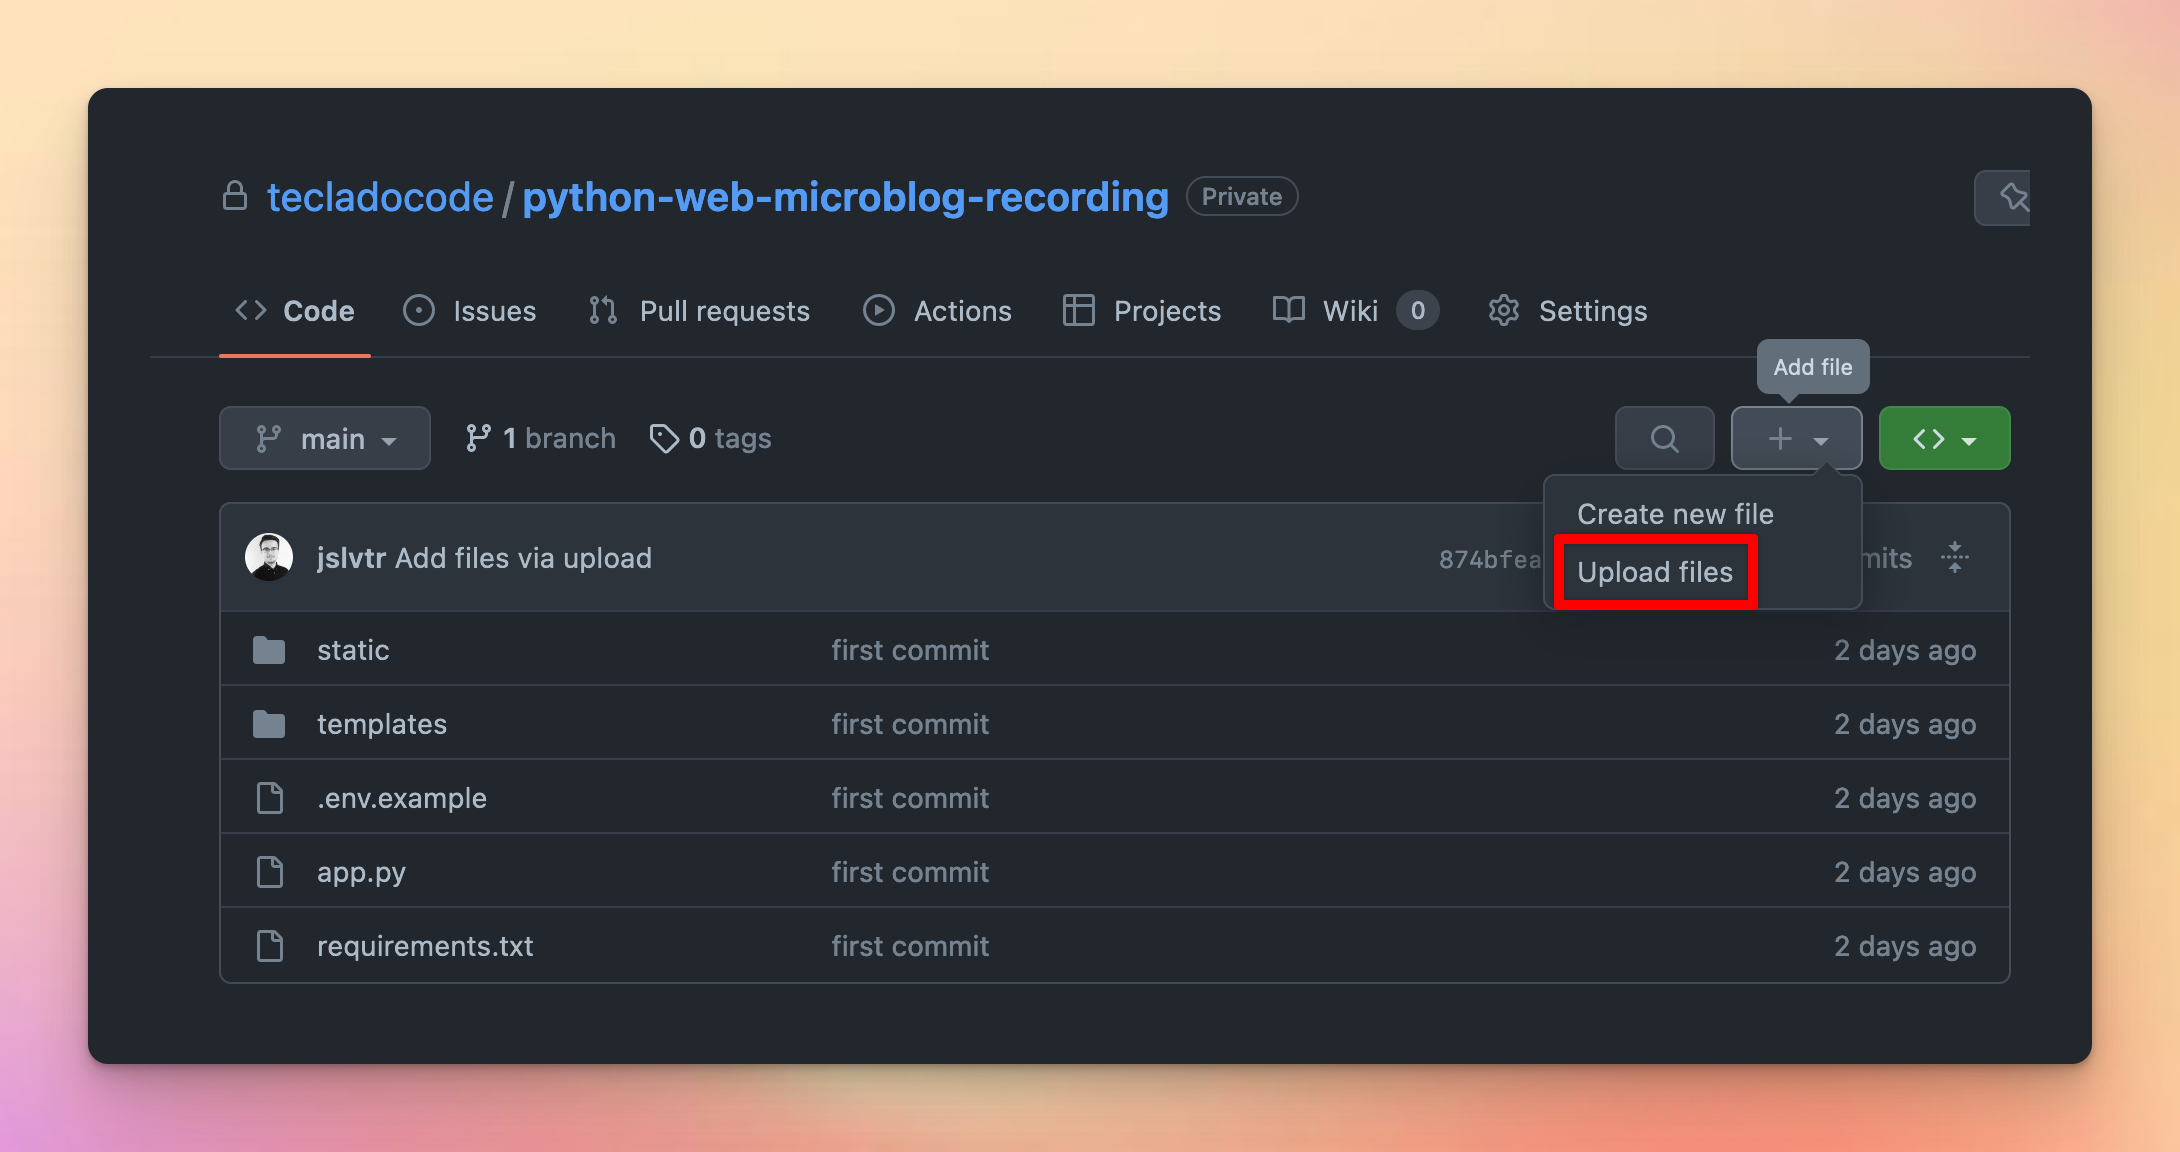 Screenshot showing the GitHub UI with a repository open, and a dropdown showing the text 'Upload files' when you click on the '+' icon